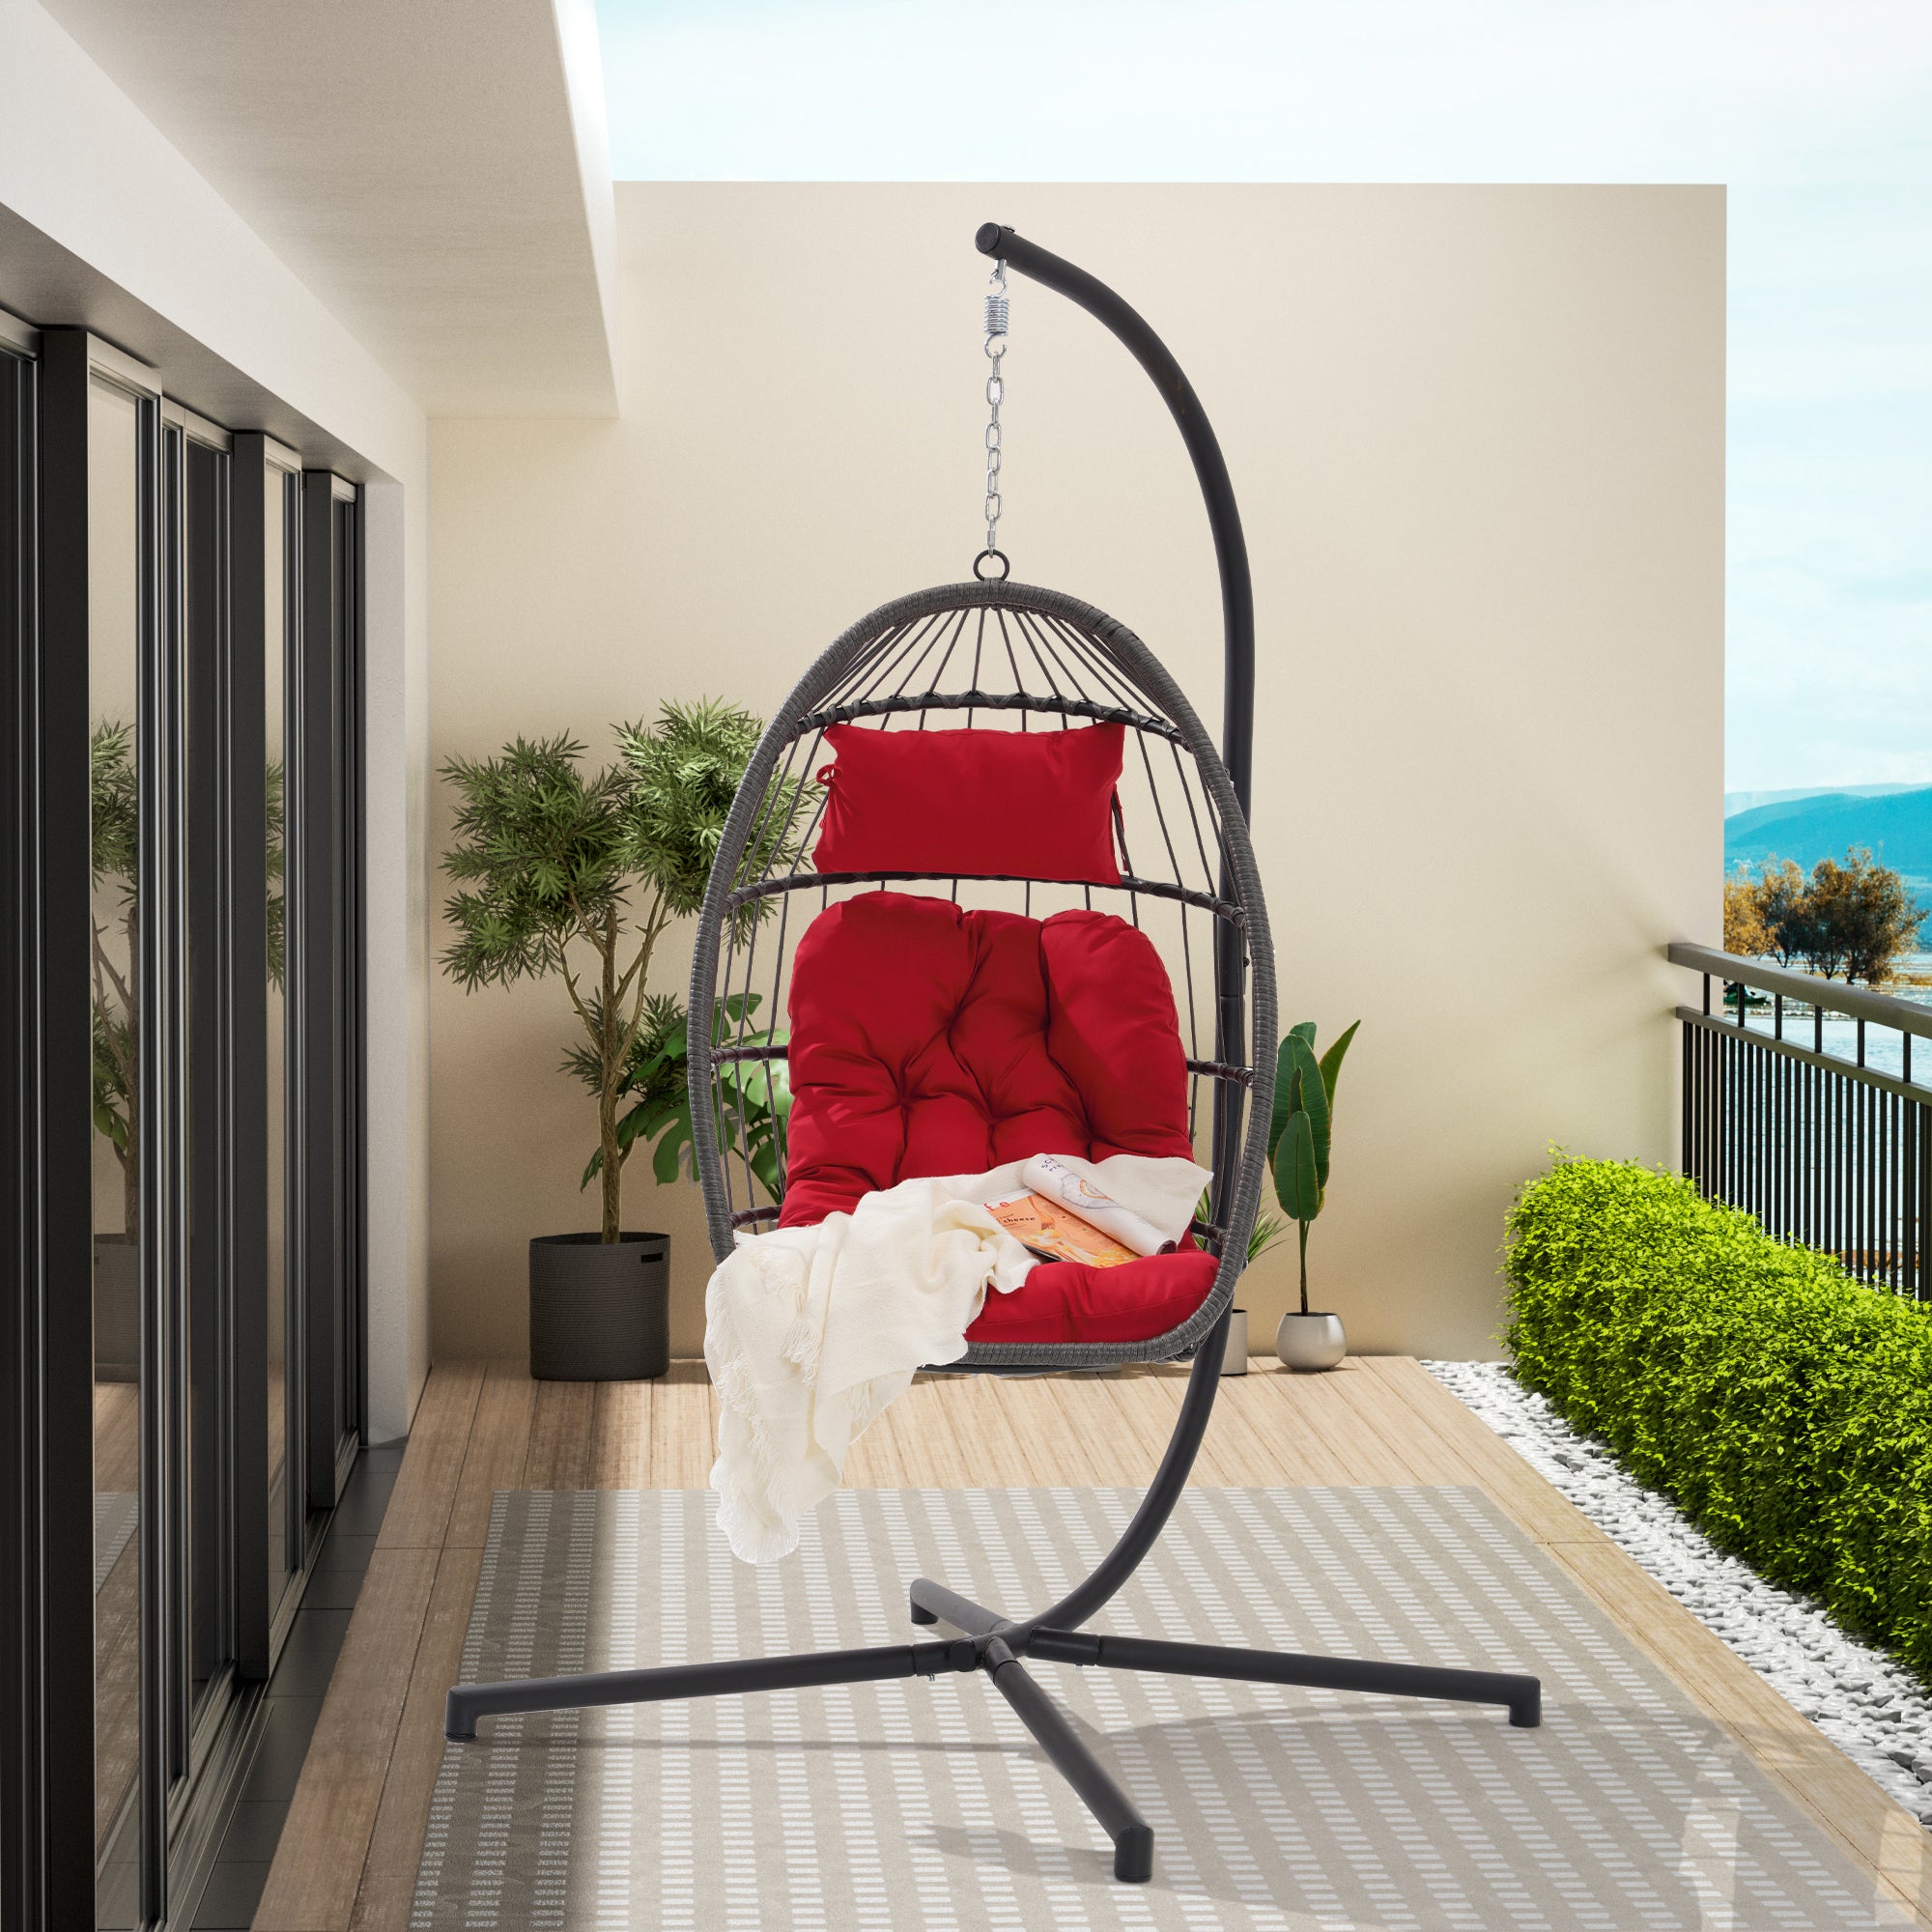 🆓🚛 Outdoor Garden Rattan Egg Swing Chair Hanging Chair PE Chair, Red Cushion